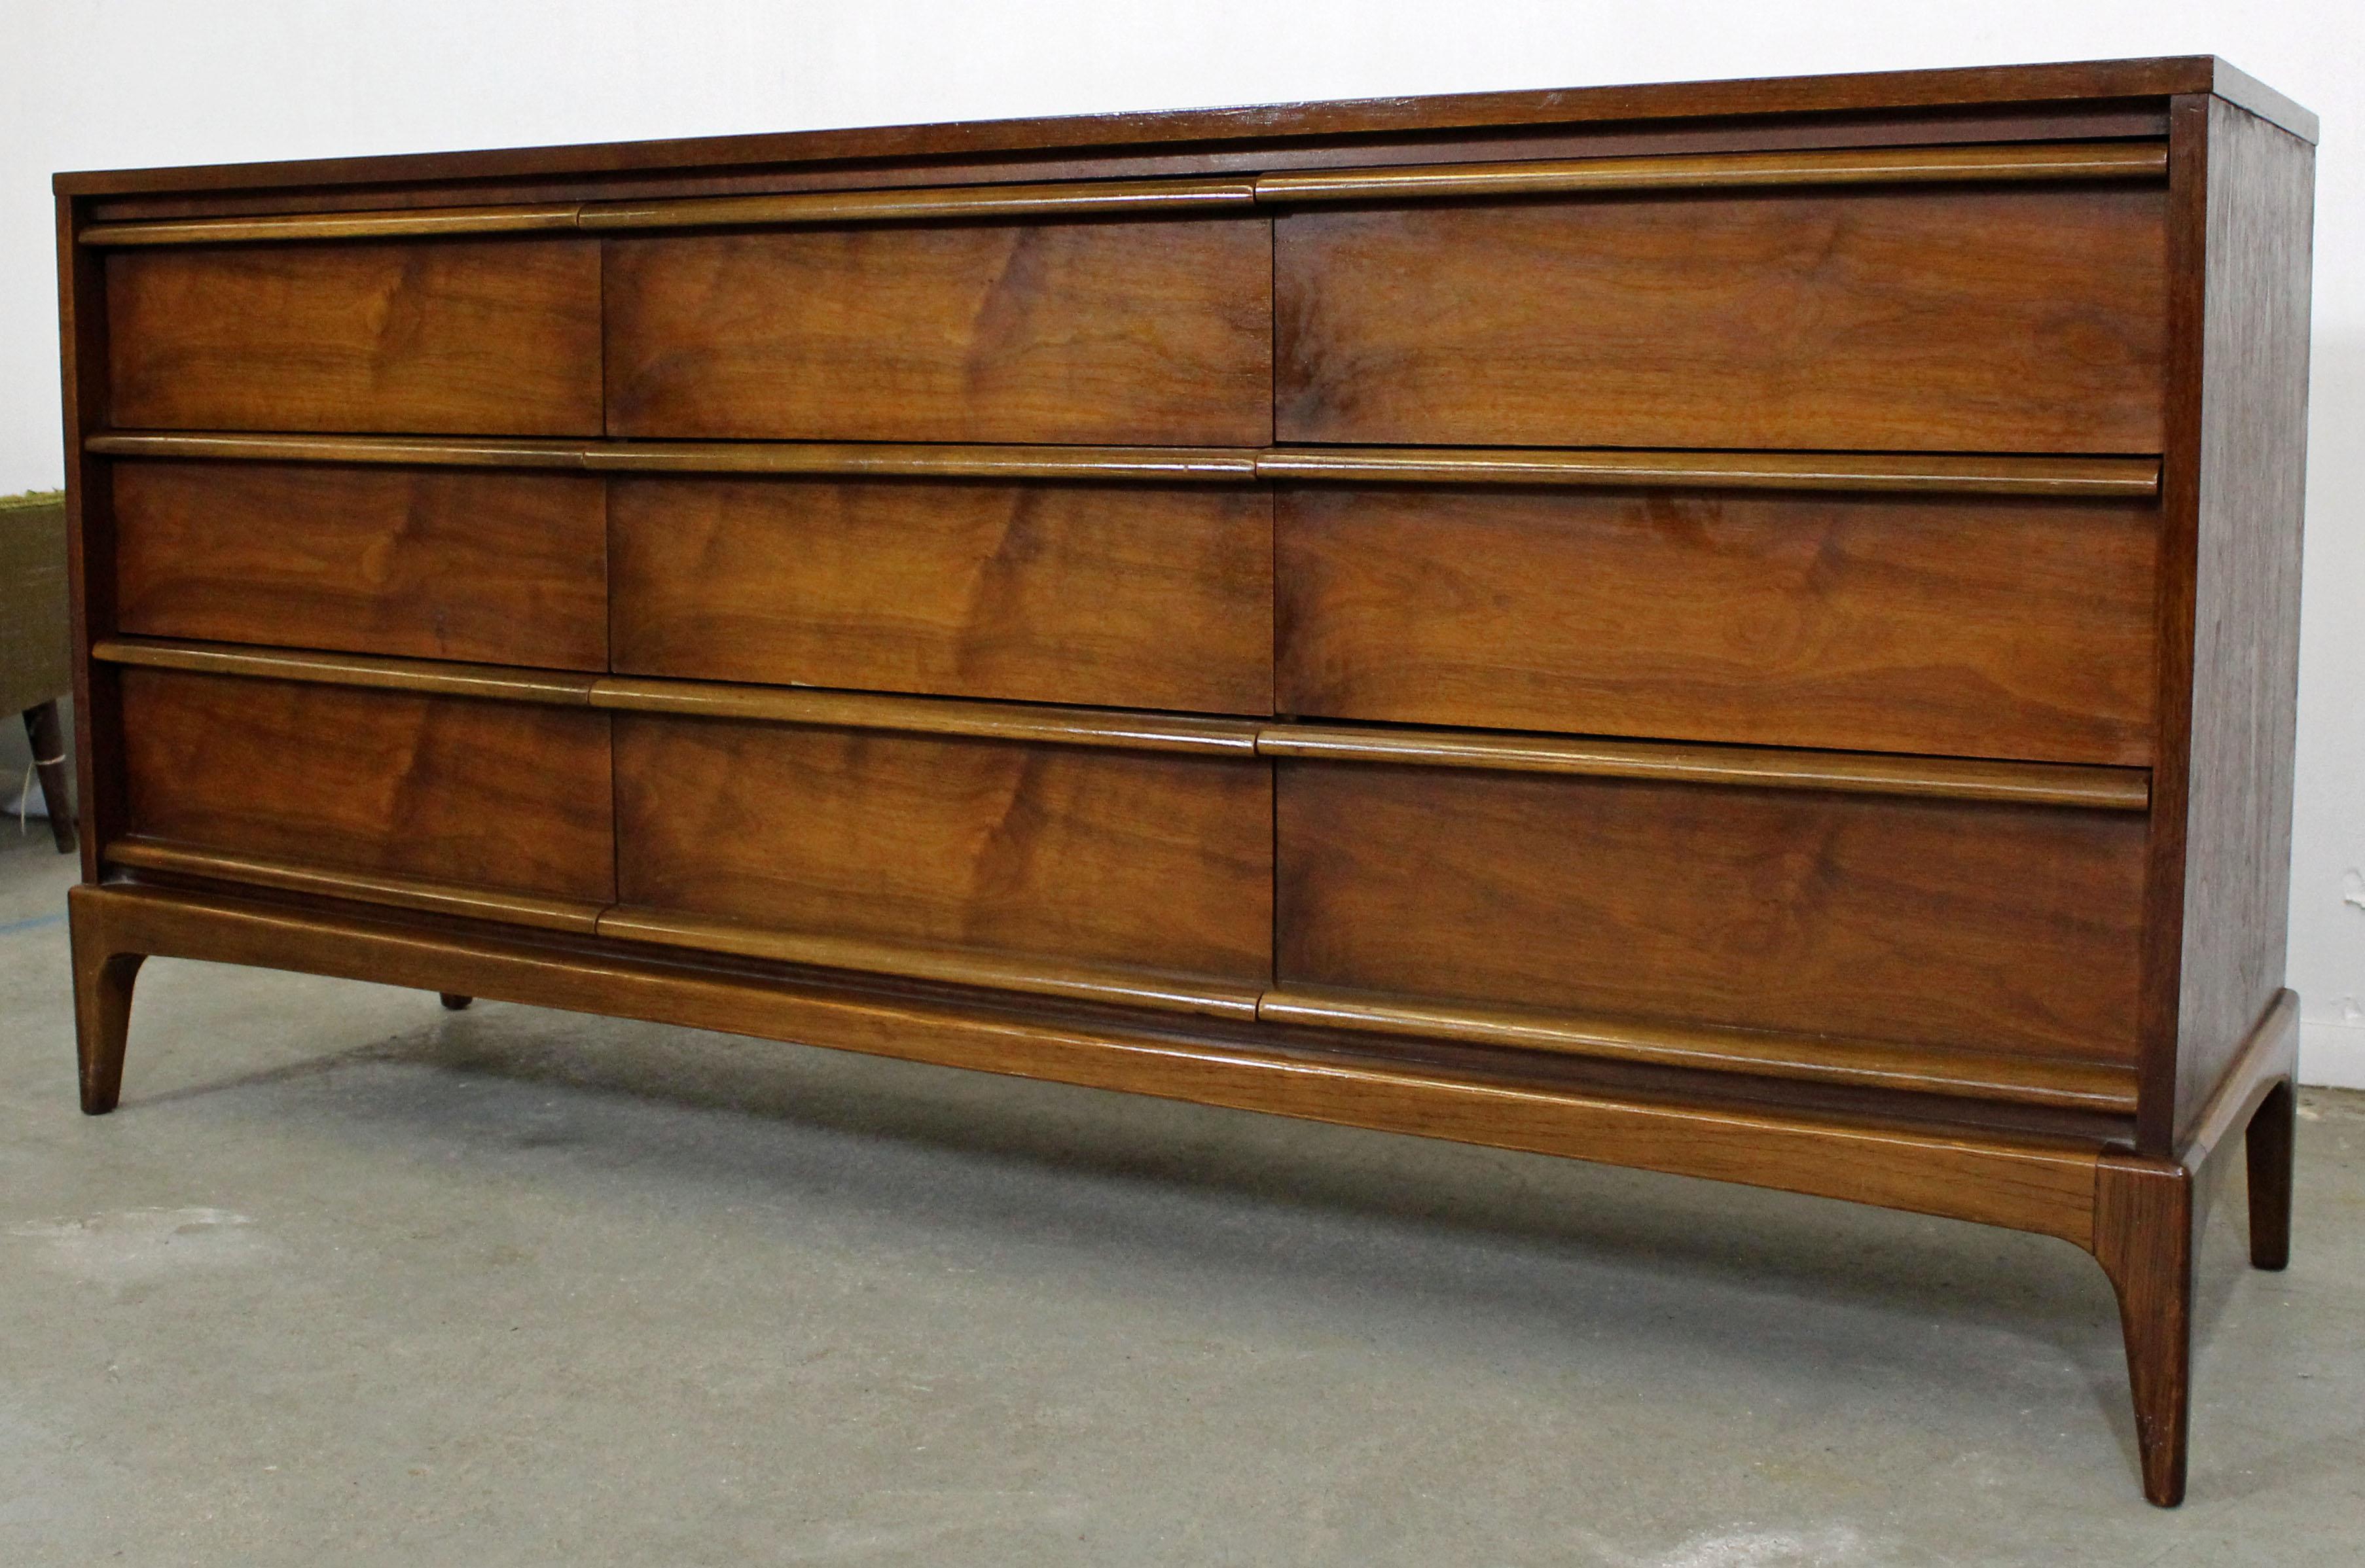 Offered is an excellent example of American Mid-Century Modern design; a walnut dresser or credenza by Lane 'Rhythm' from the 1960s. Features 9 dovetailed drawers with tapered legs and sculpted pulls. It is in excellent condition for its age with